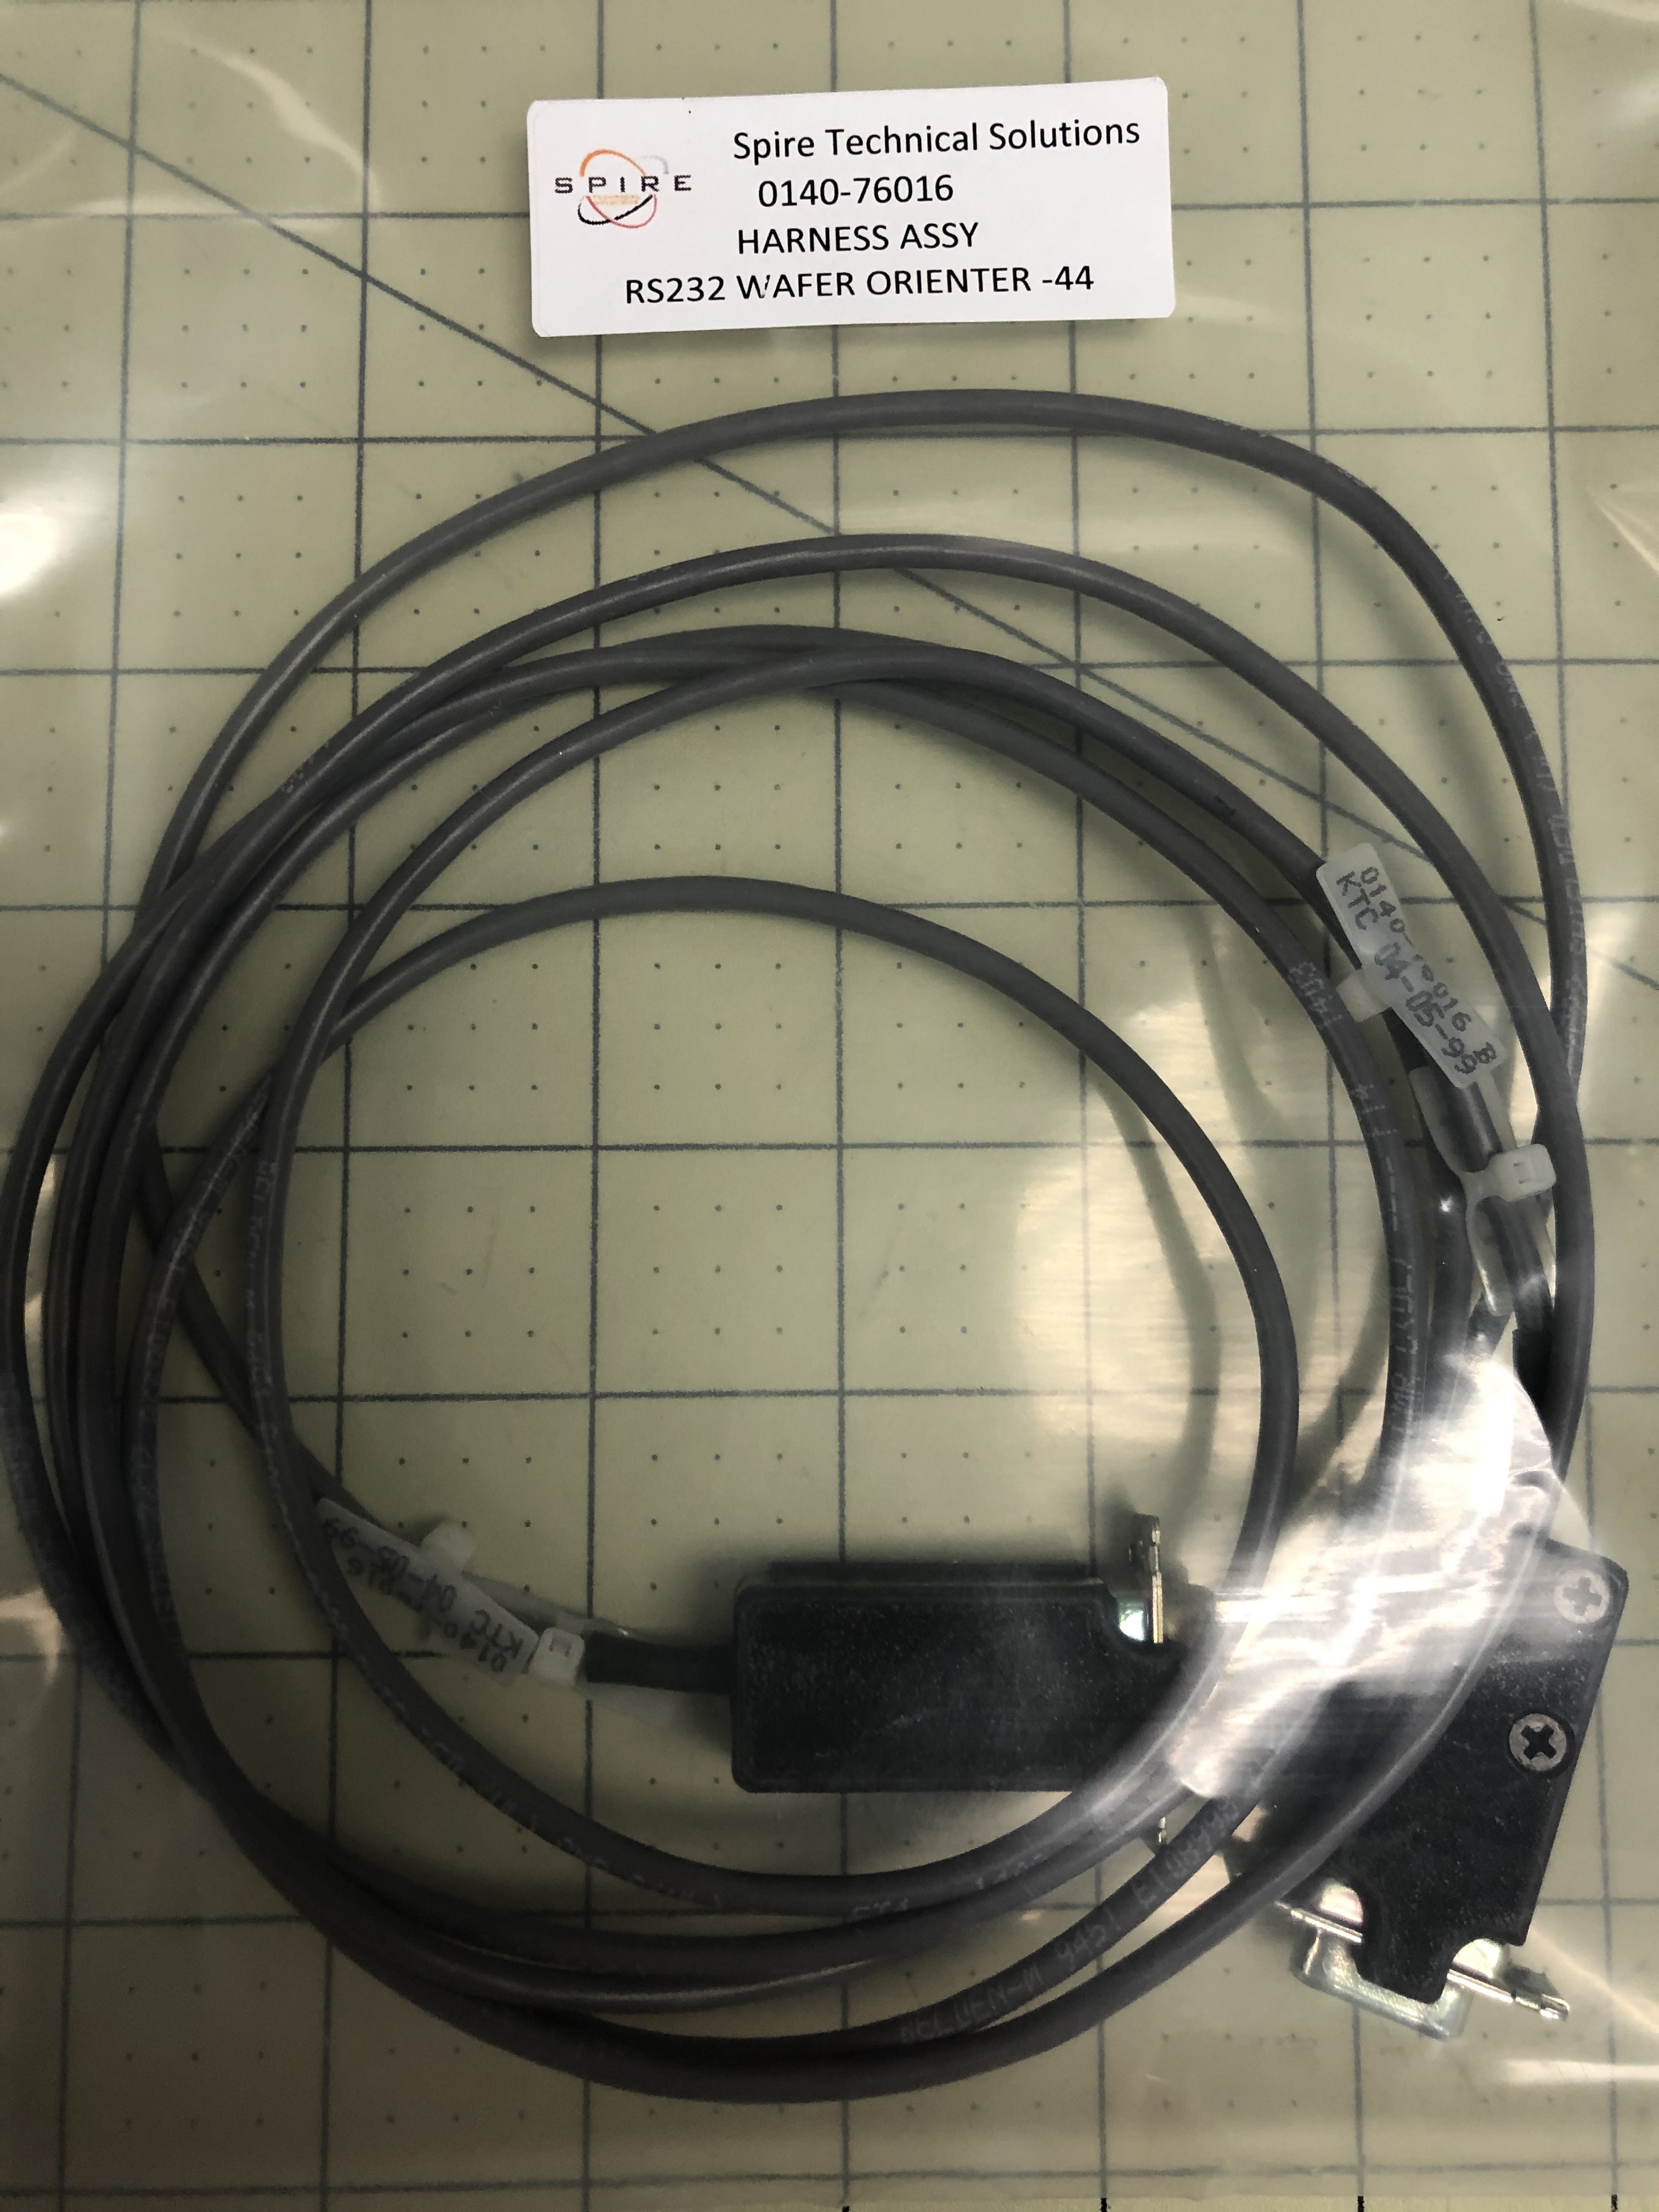 HARNESS ASSY RS232 WAFER ORIENTER